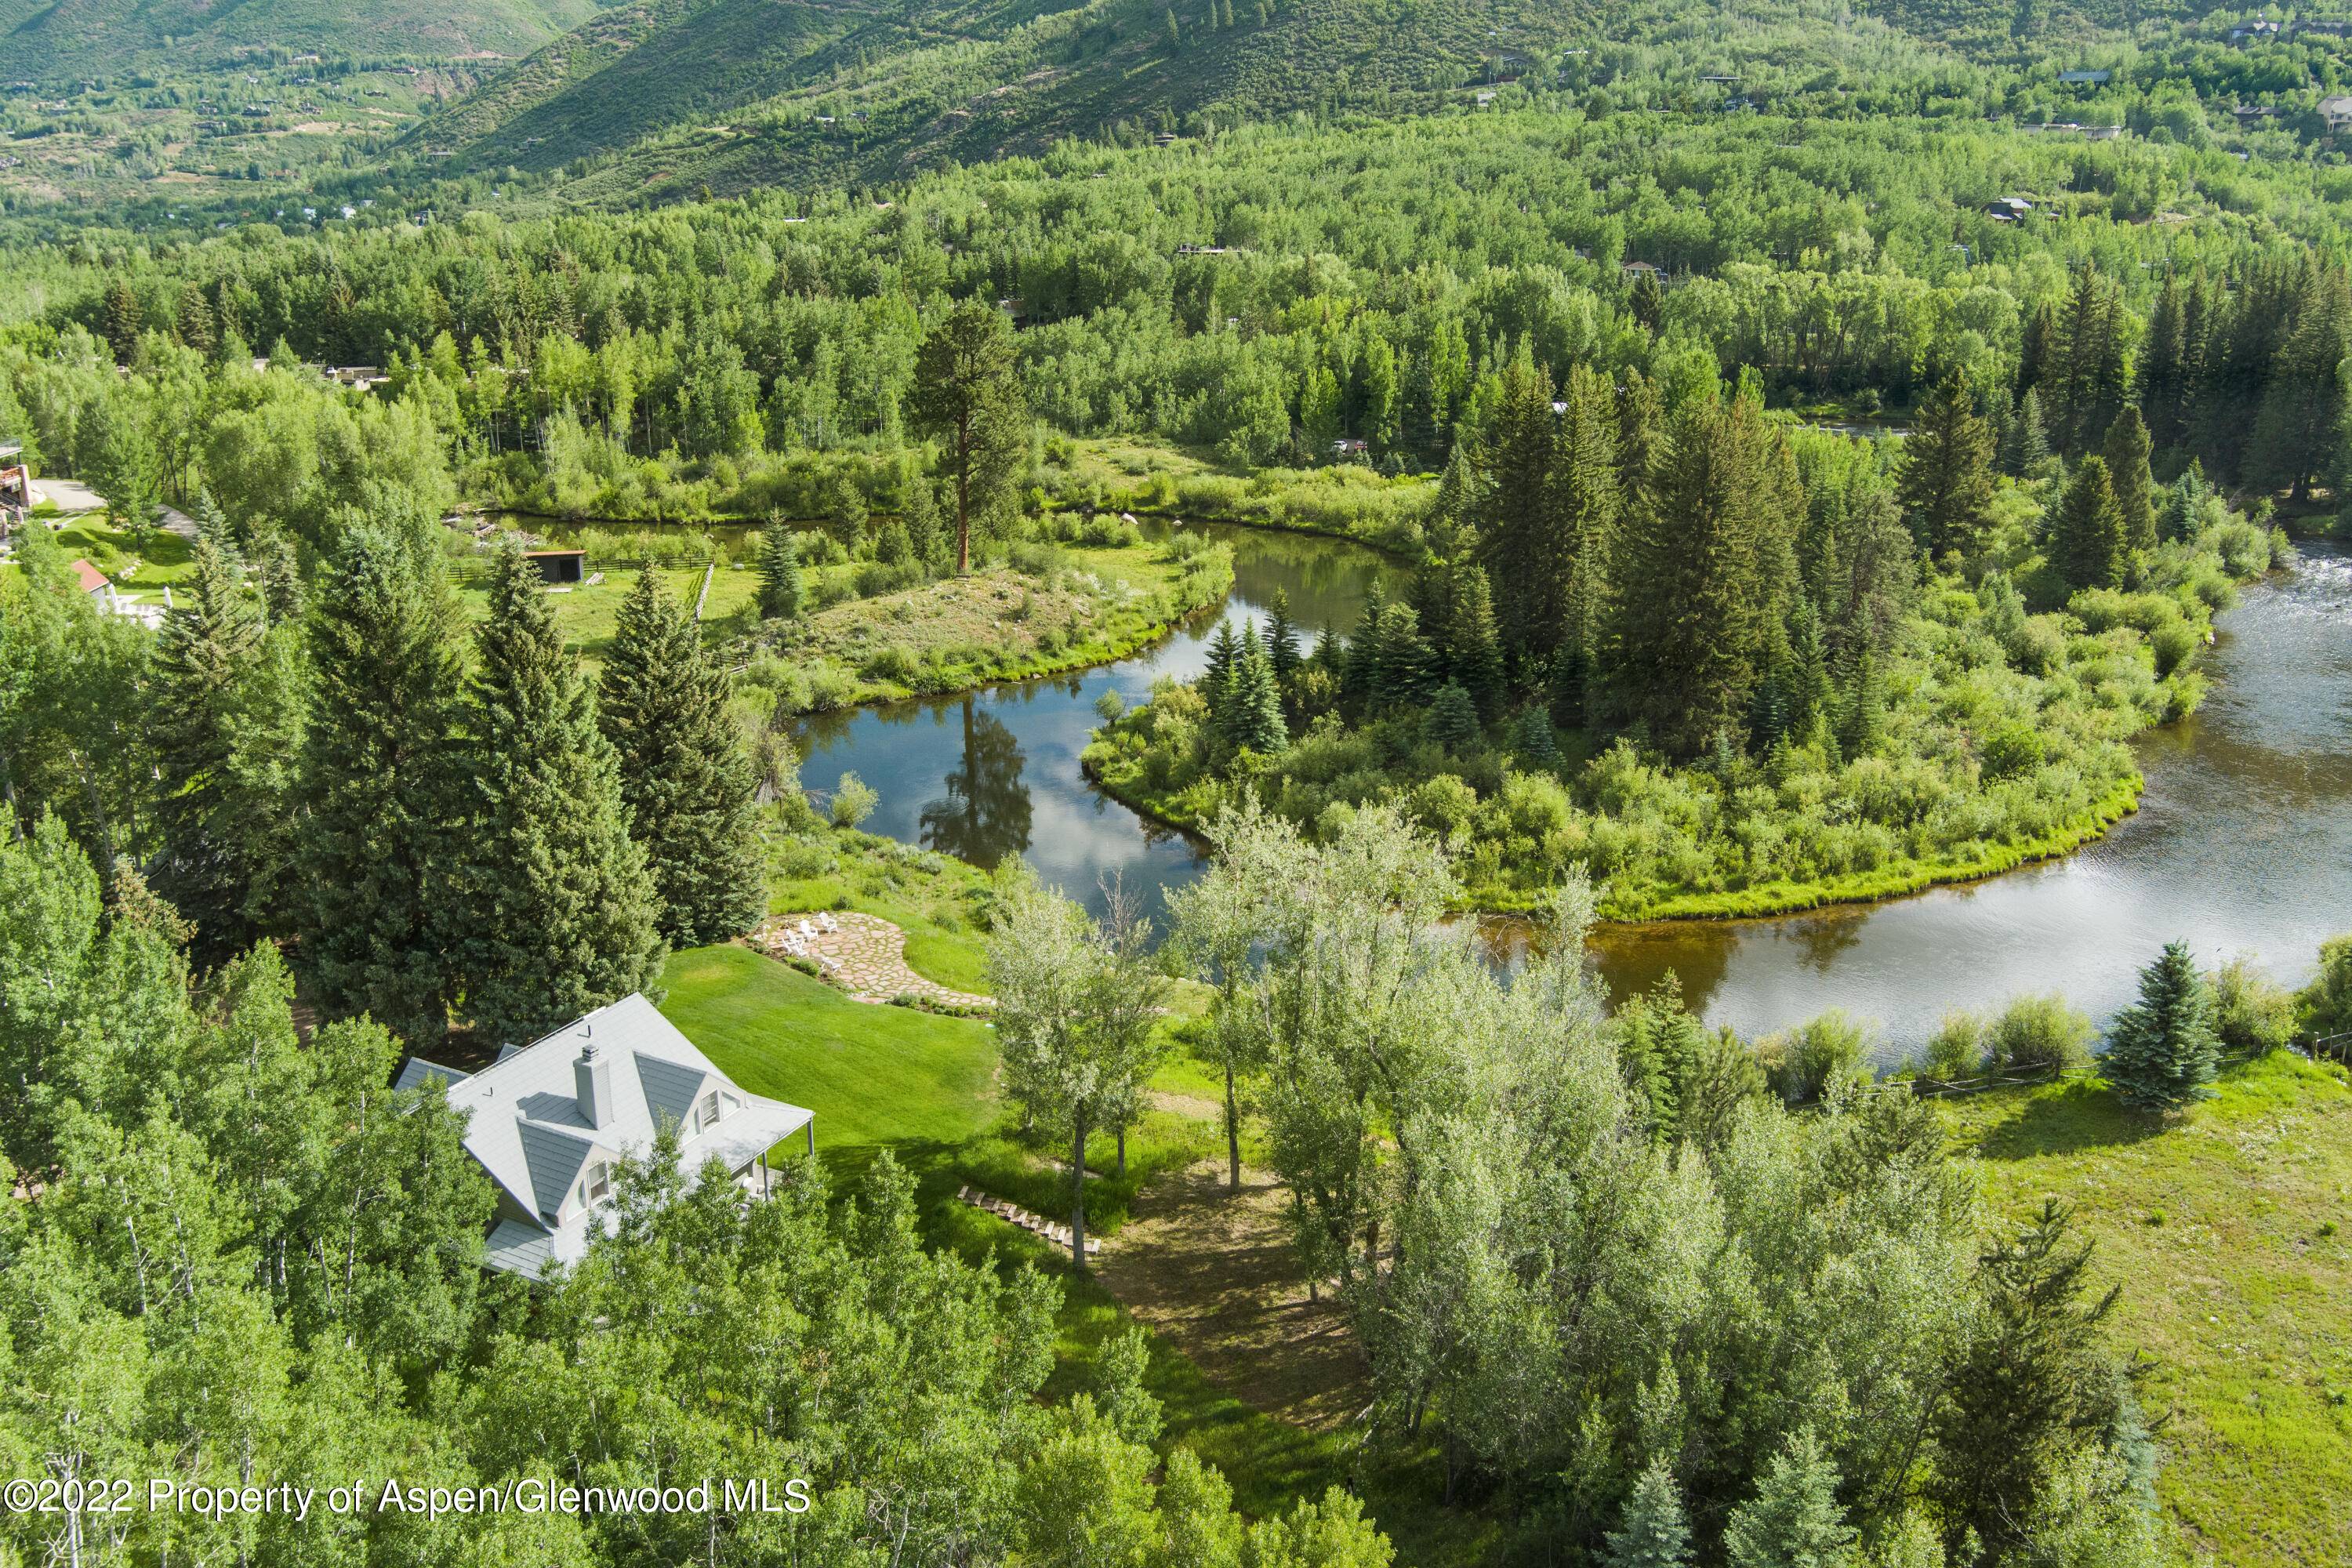 Located at the end of Ute Avenue along a bend in the Roaring Fork River sits a spectacular 2.